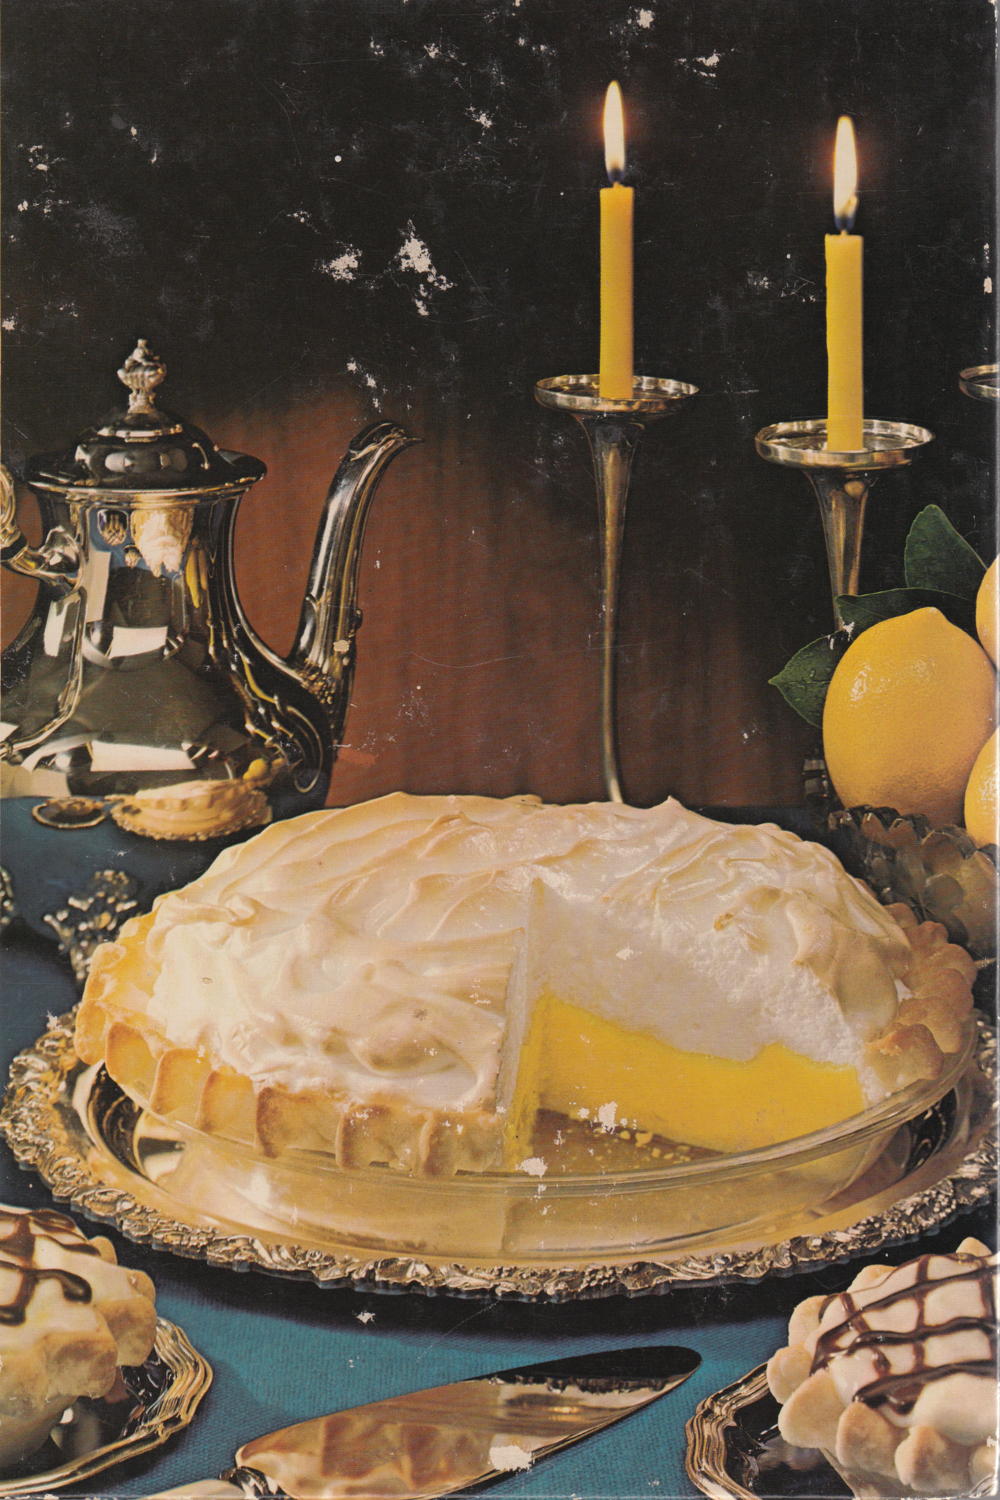 Southern Living Pies and Pastries: Lemon meringue pie on the cover of the Southern Living Pies and Pastry Cookbook.; cookbooks; lemons; Southern Living; pie